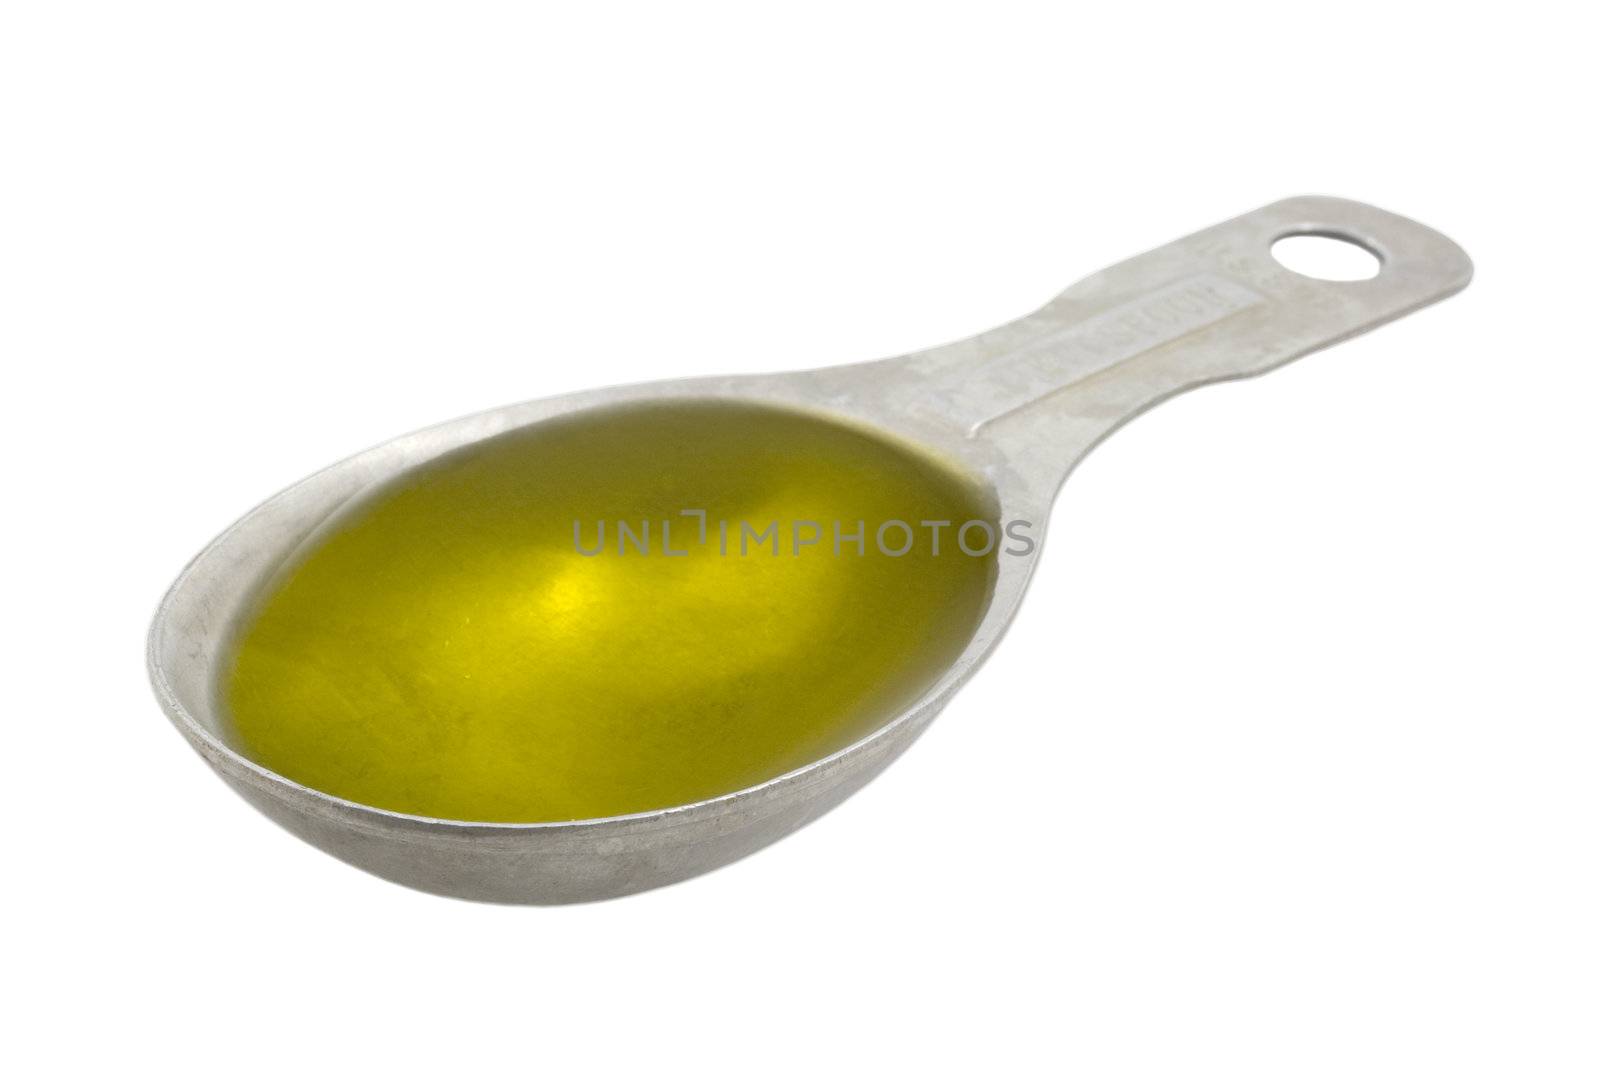 Measuring tablespoon of olive oil by PixelsAway